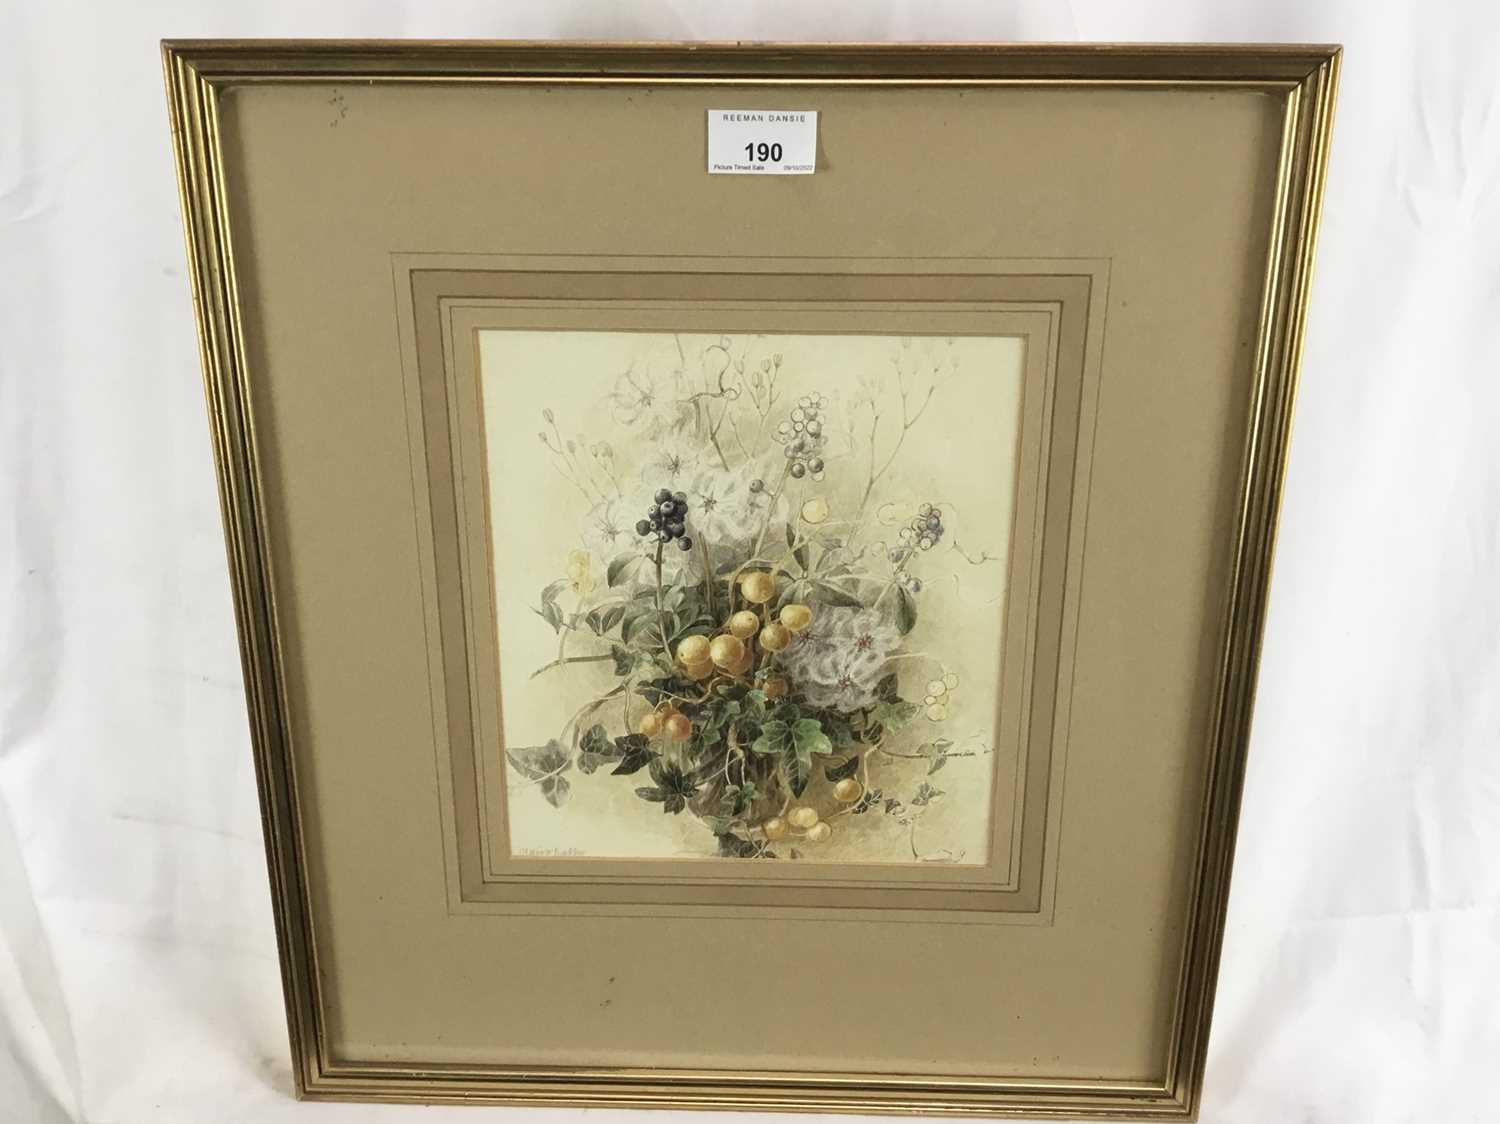 Claire Dalby, contemporary, watercolour - still life, signed, in glazed frame - Image 2 of 6